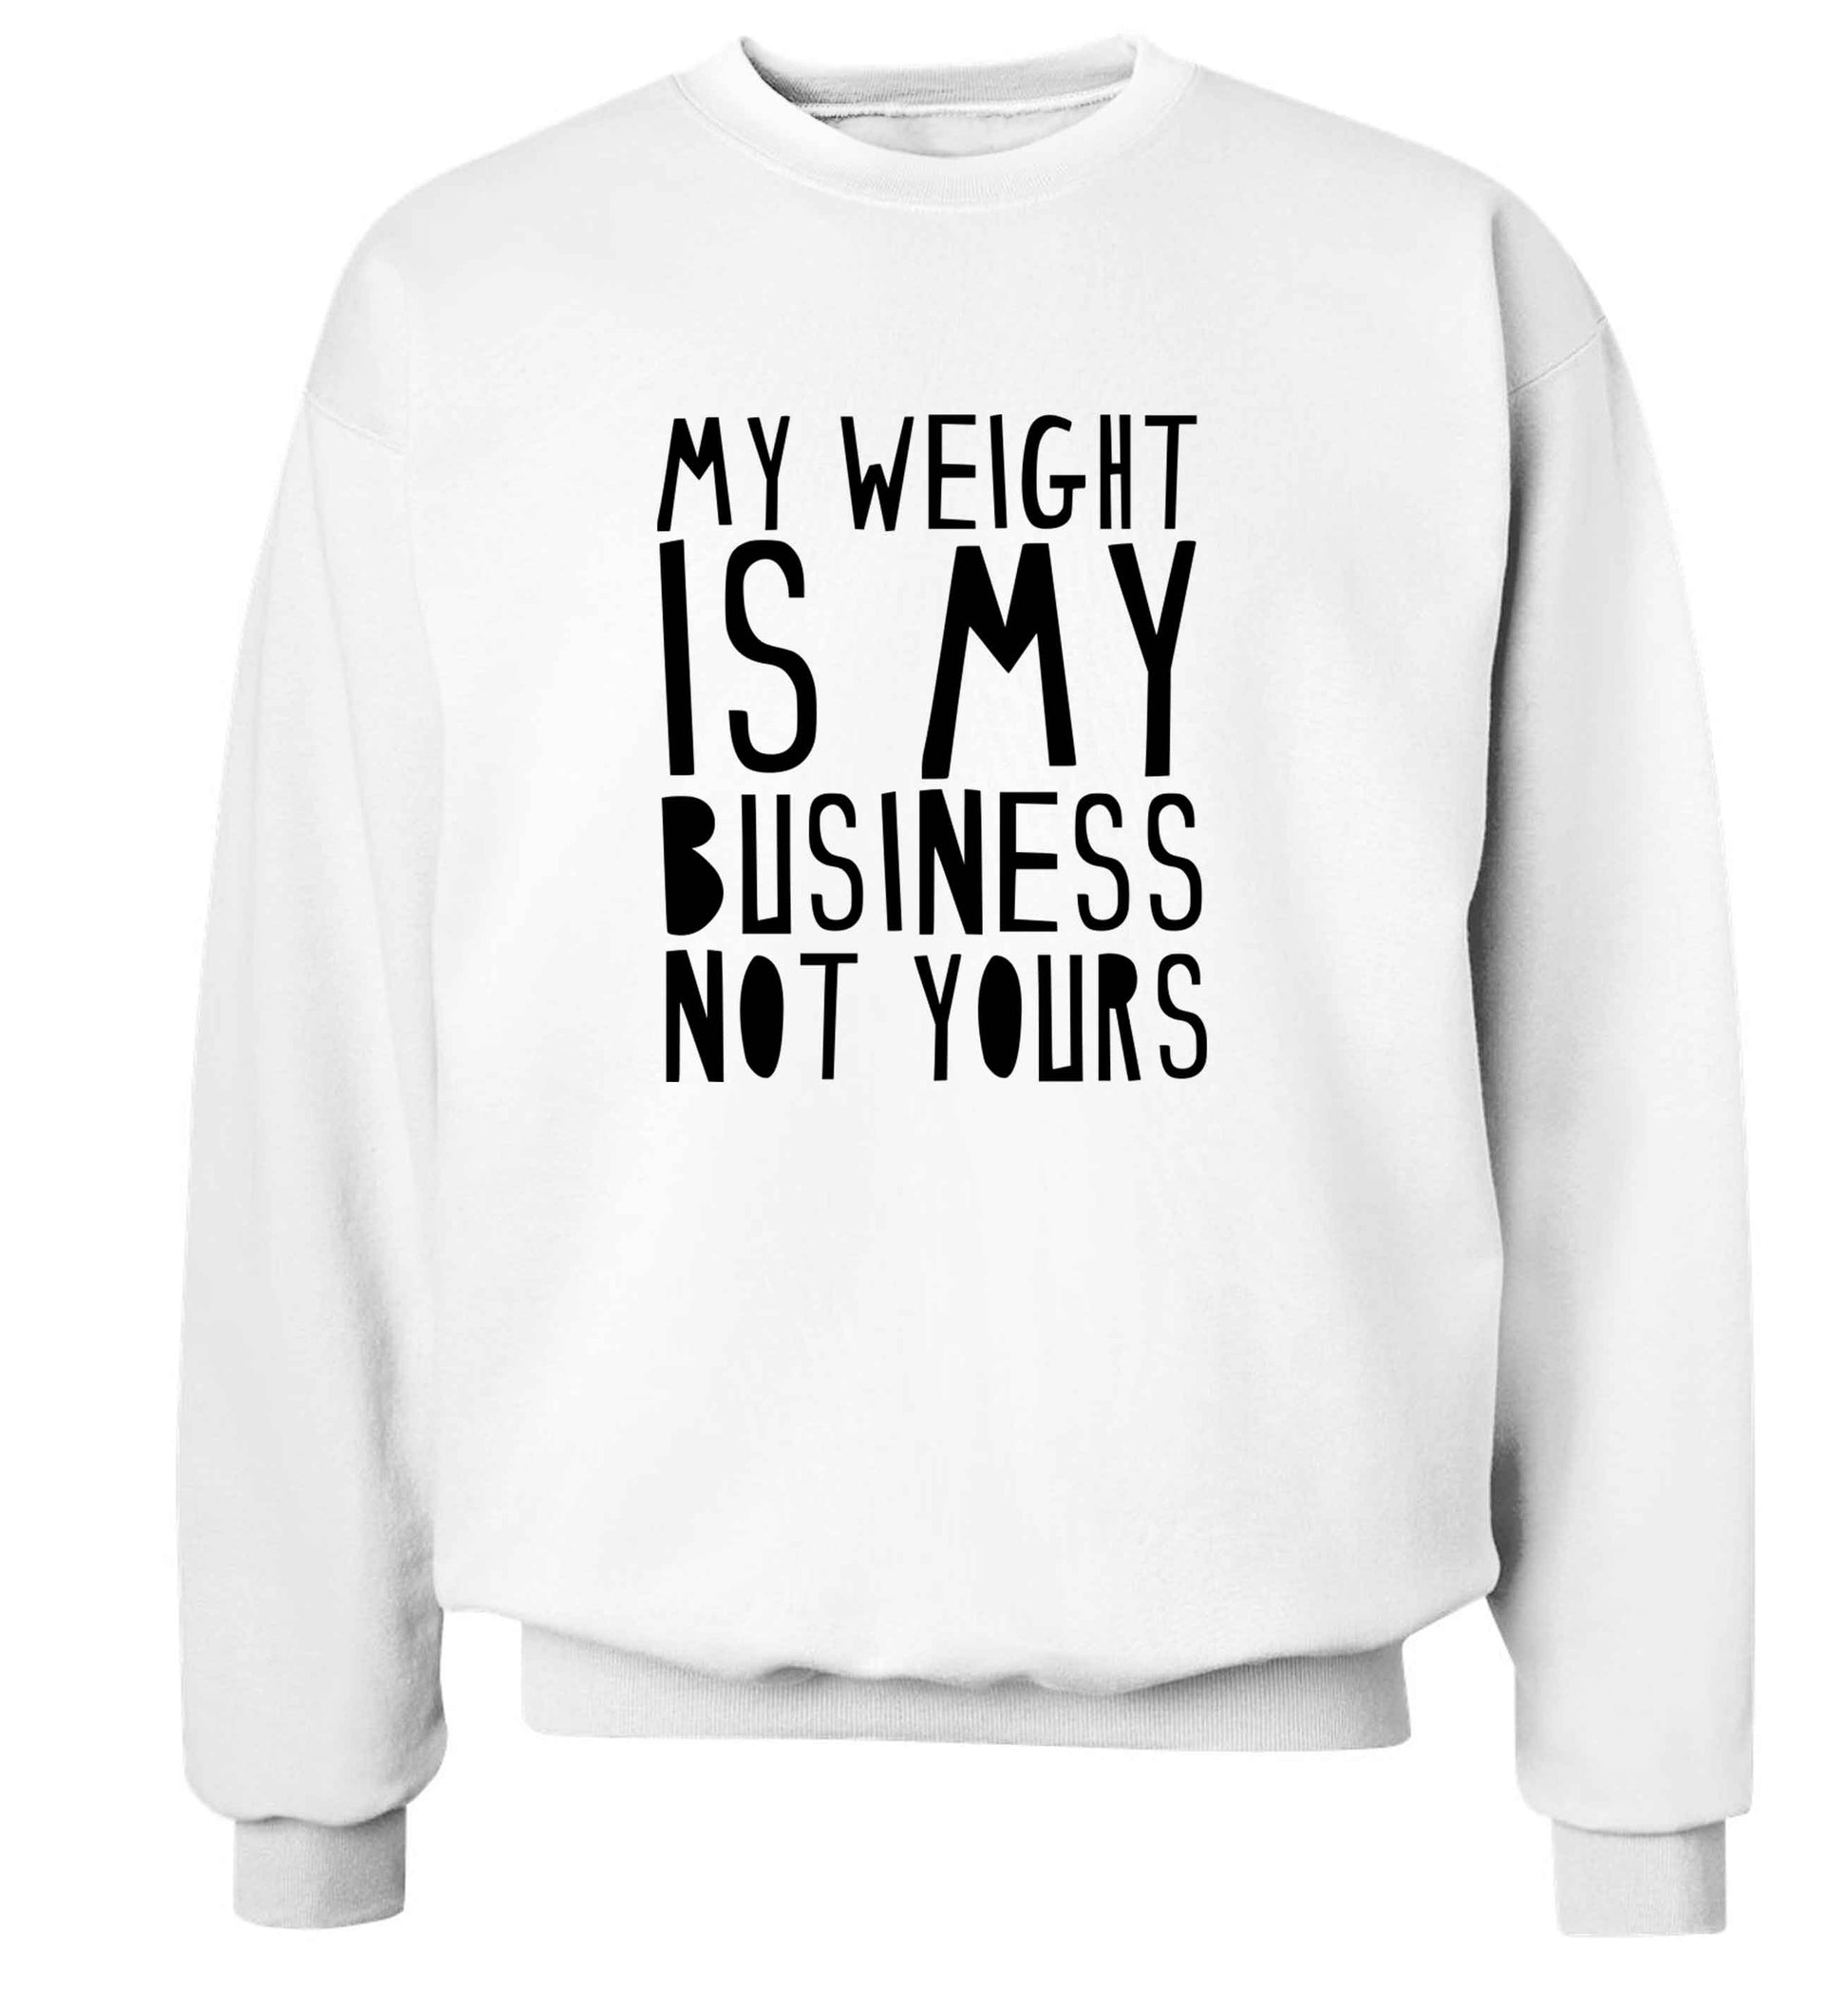 My weight is my business not yours adult's unisex white sweater 2XL